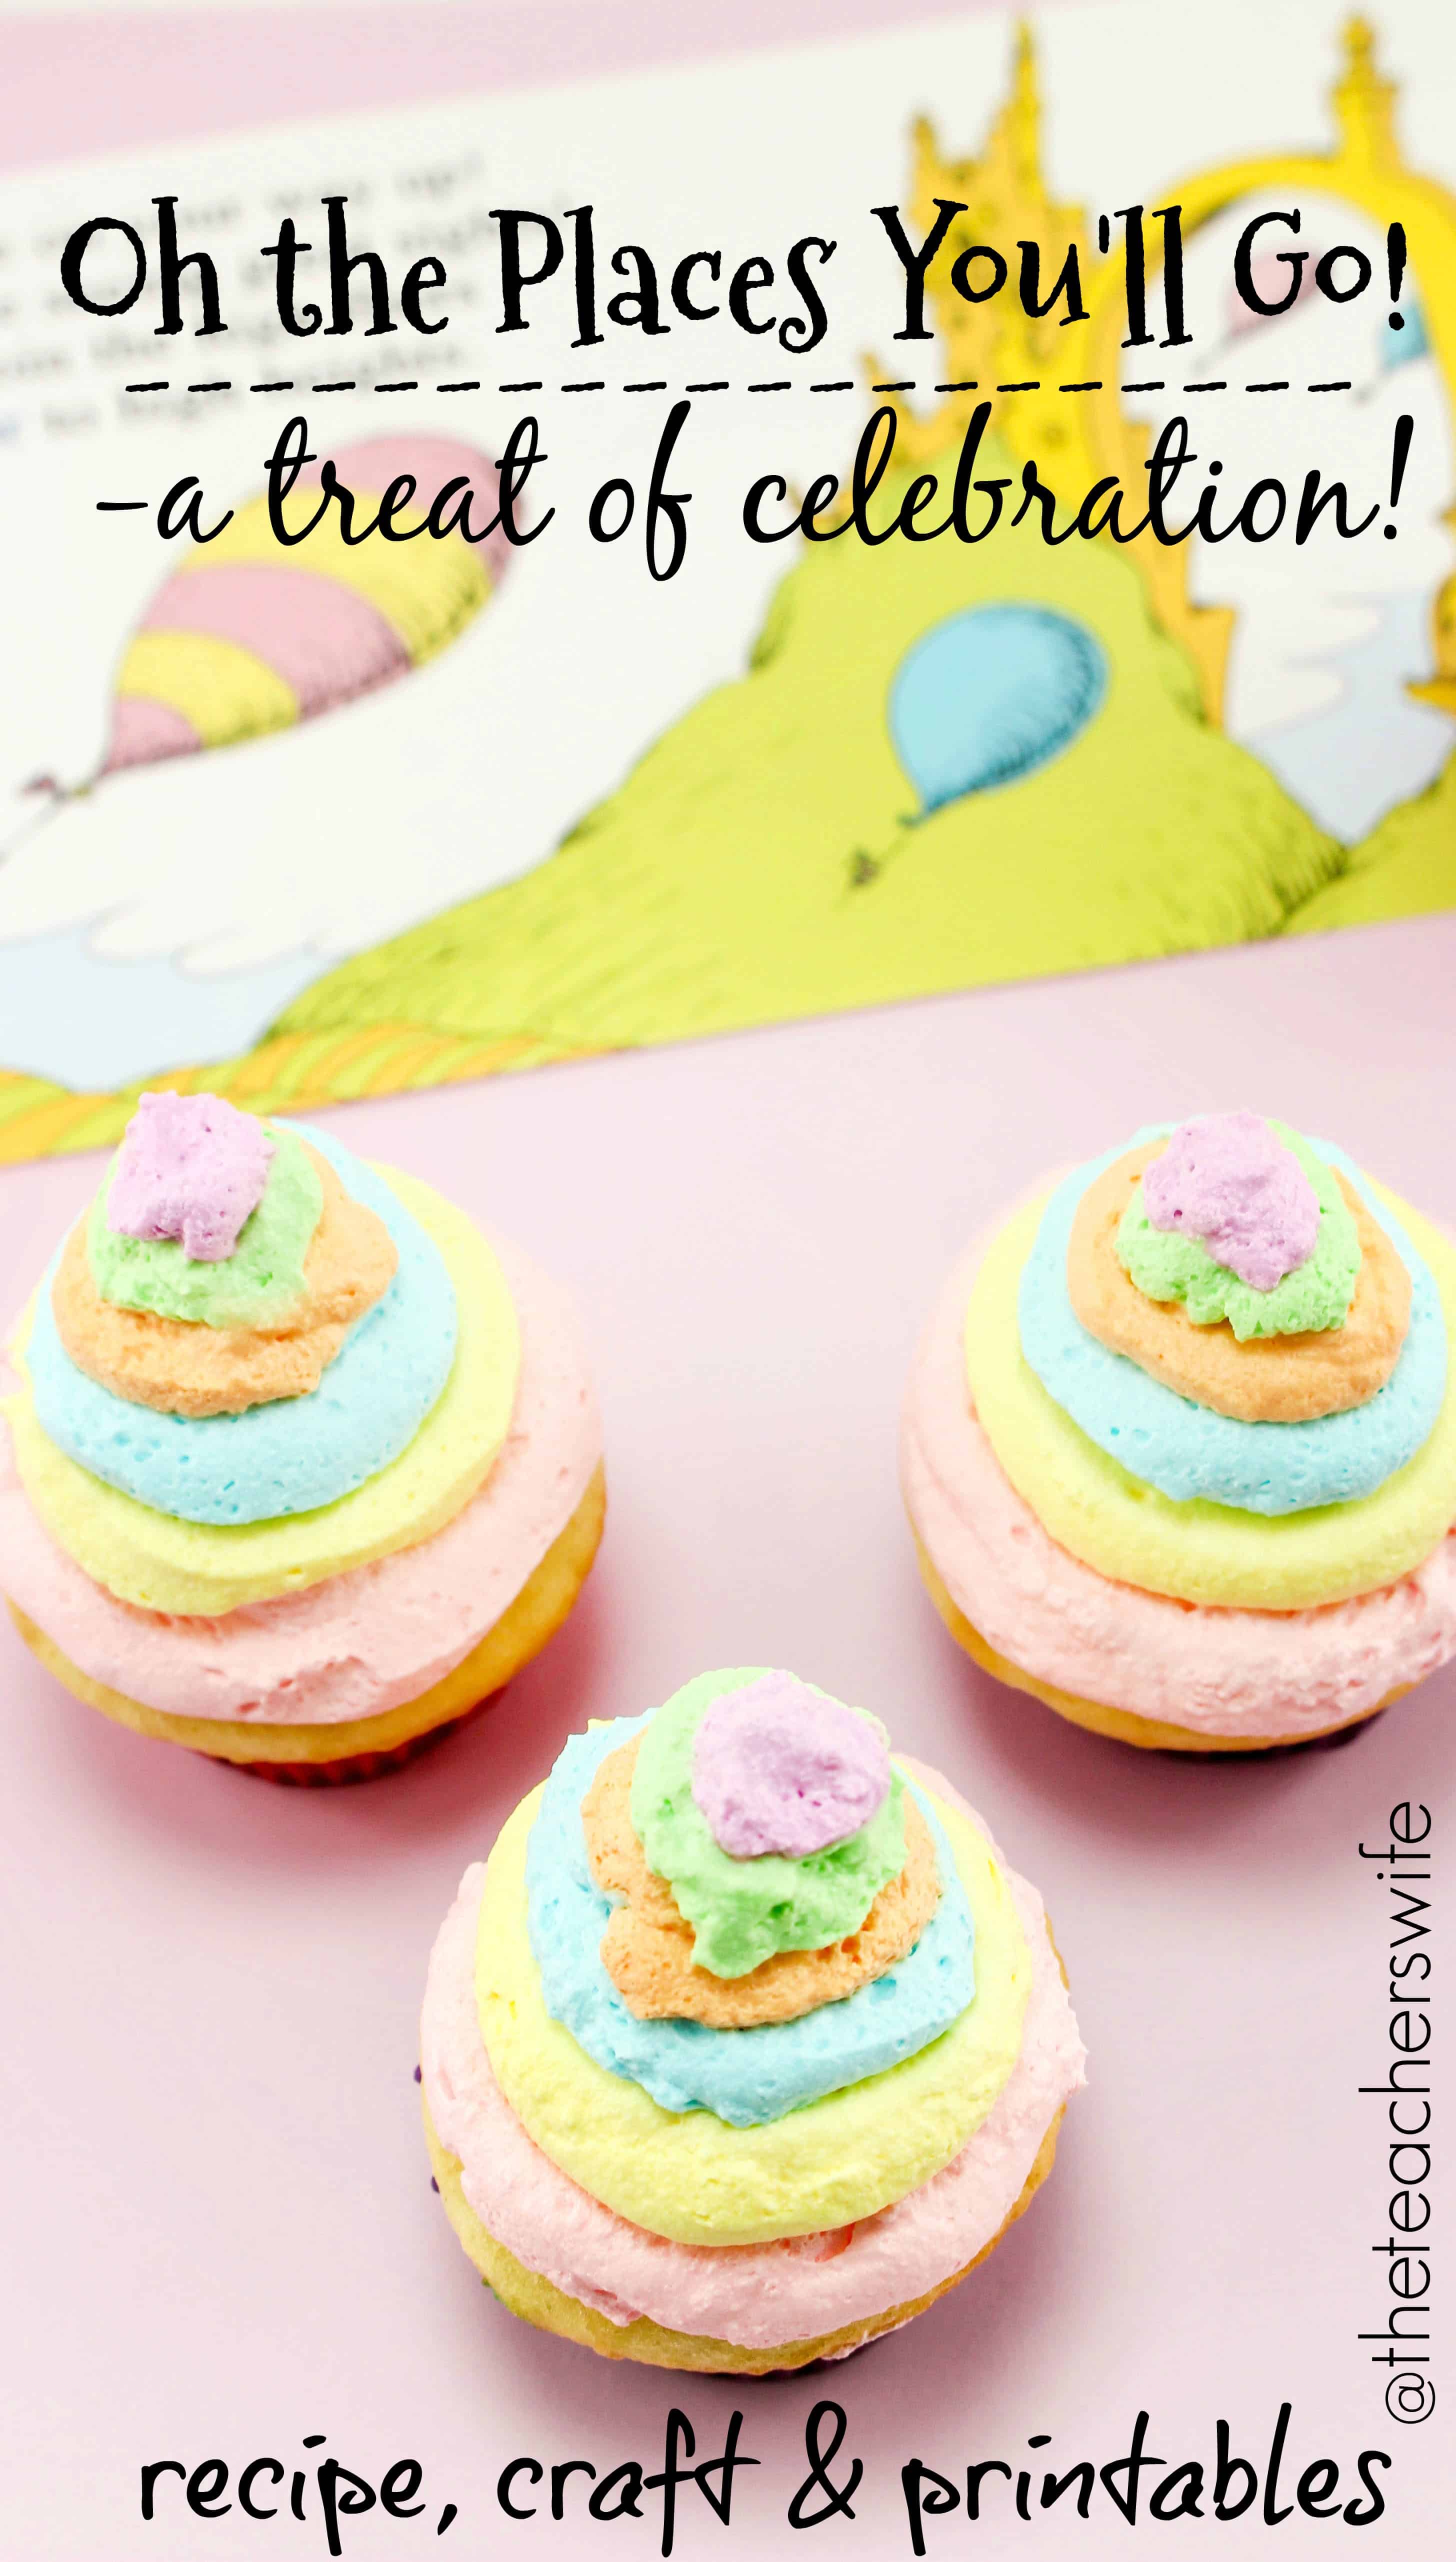 Oh the Places You'll Go cupcakes